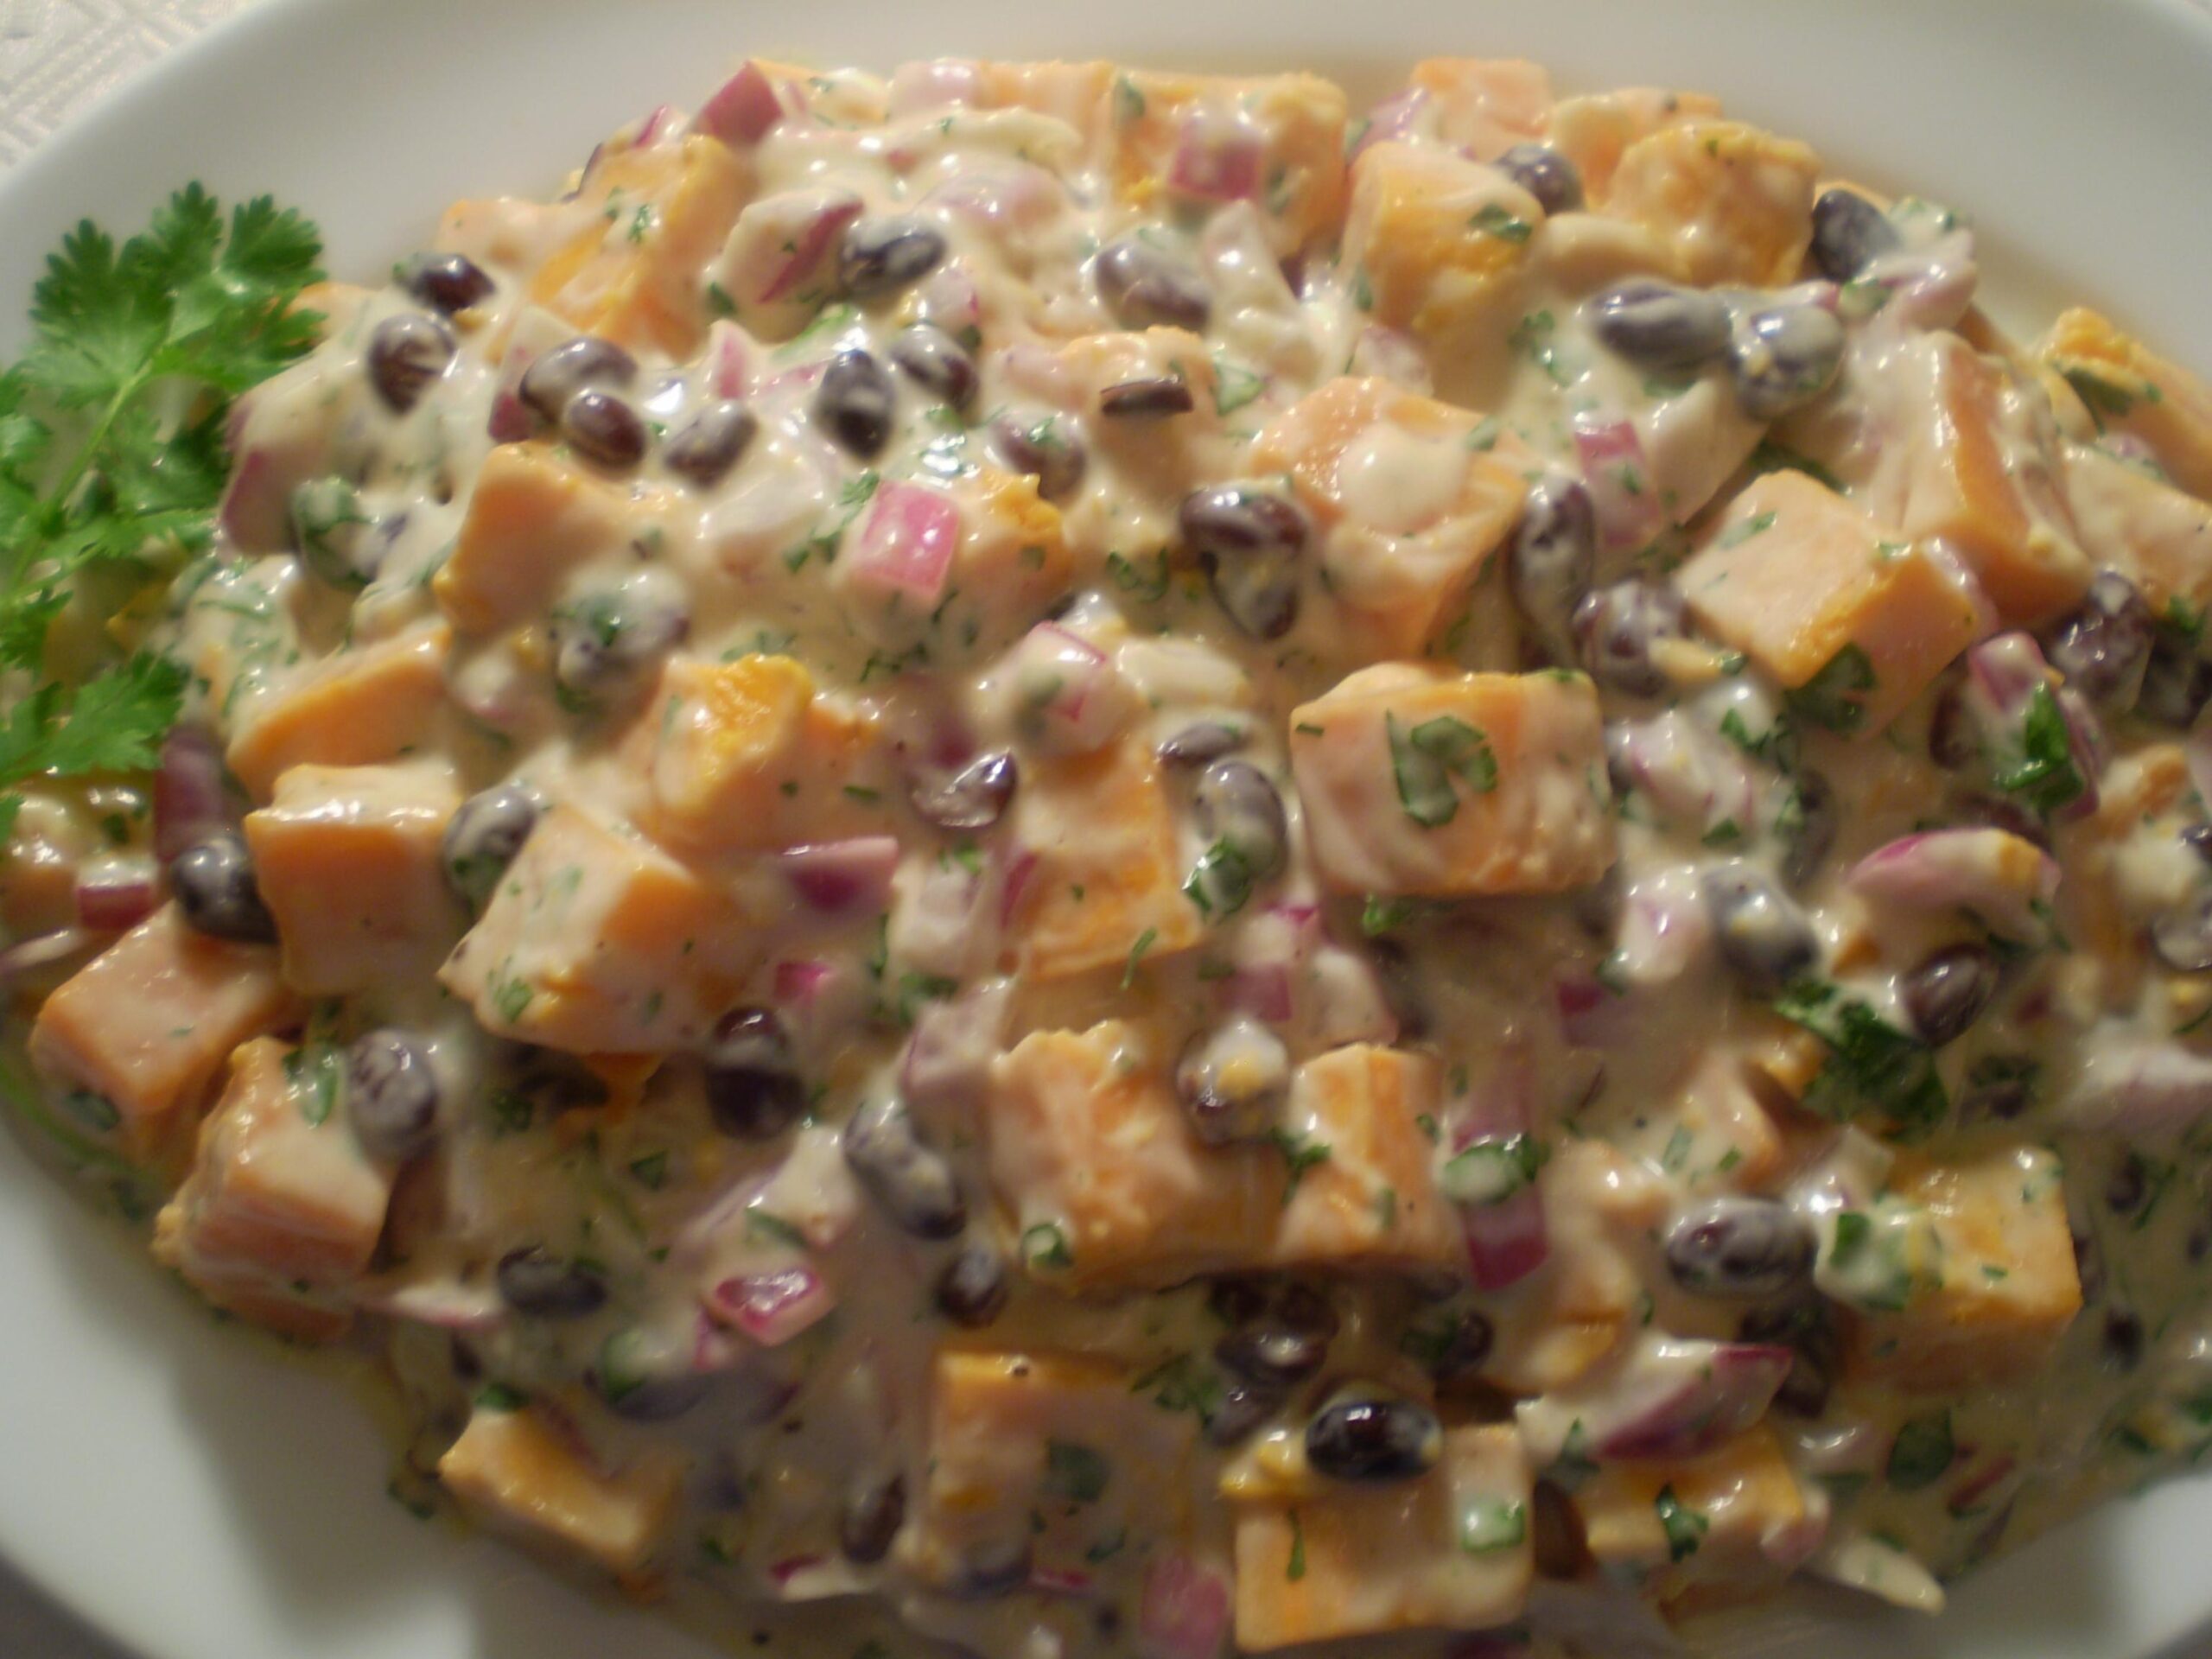  Bringing the flavors of Brazil to your table with this colorful potato salad!